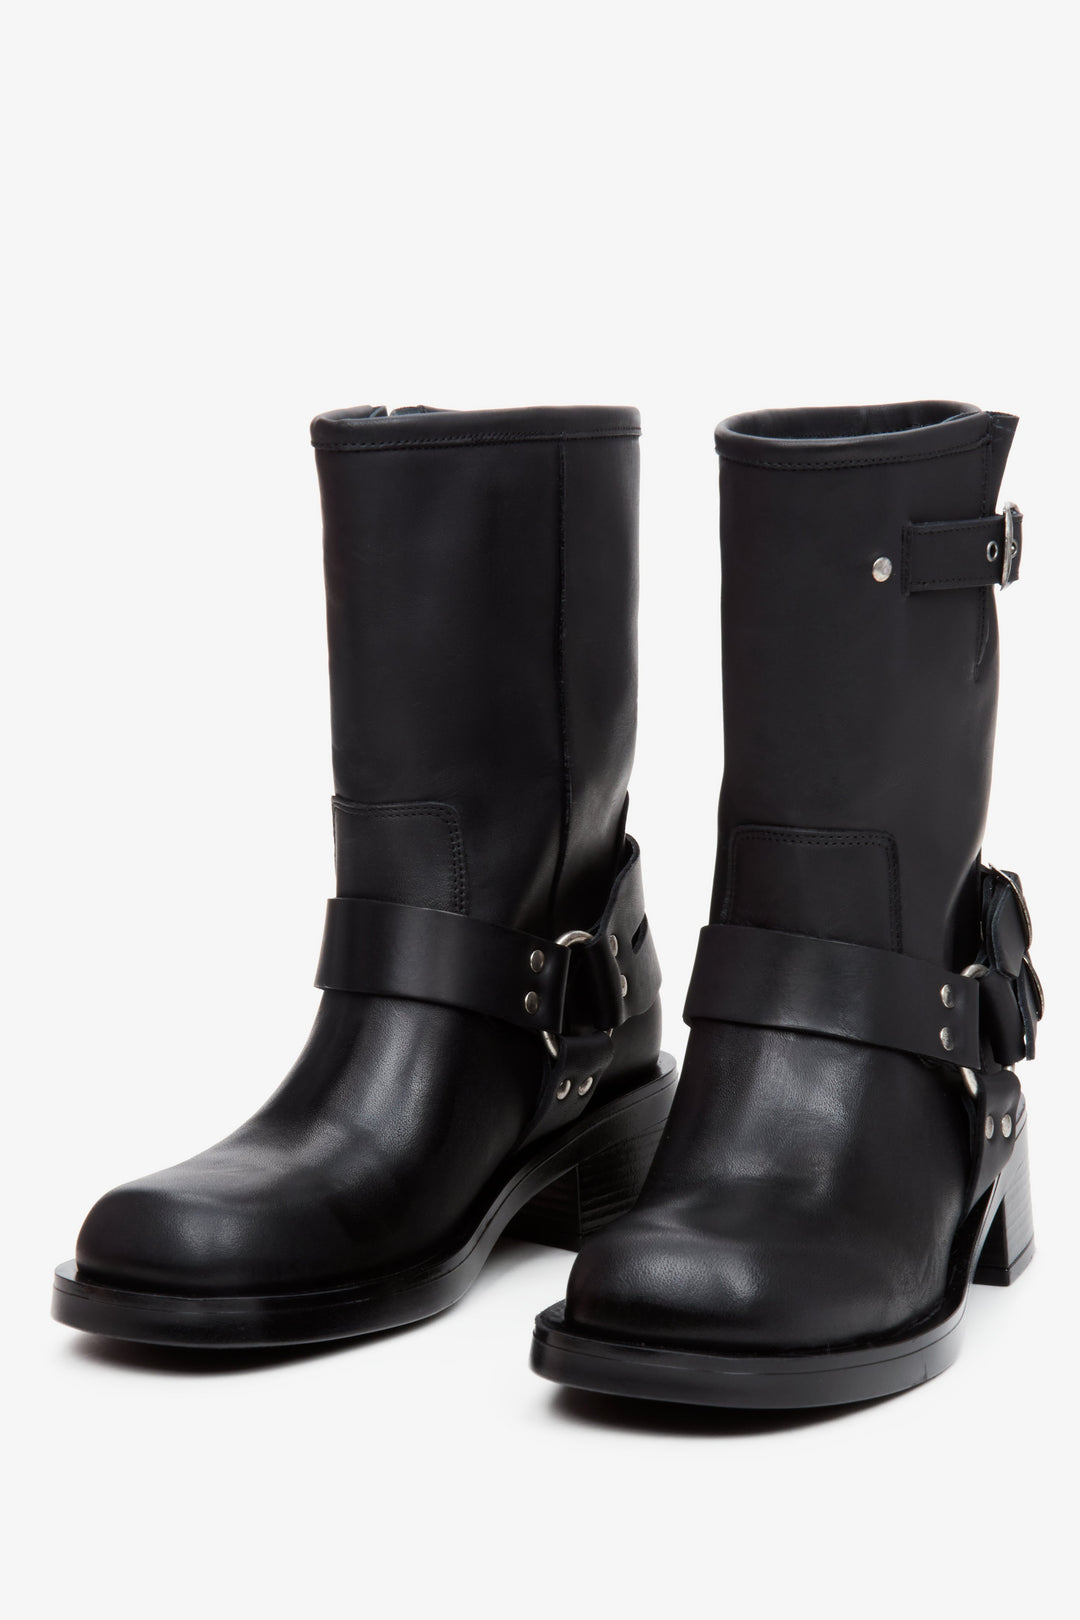 Women's boots made of Italian genuine leather by Estro - front view presentation of the model.